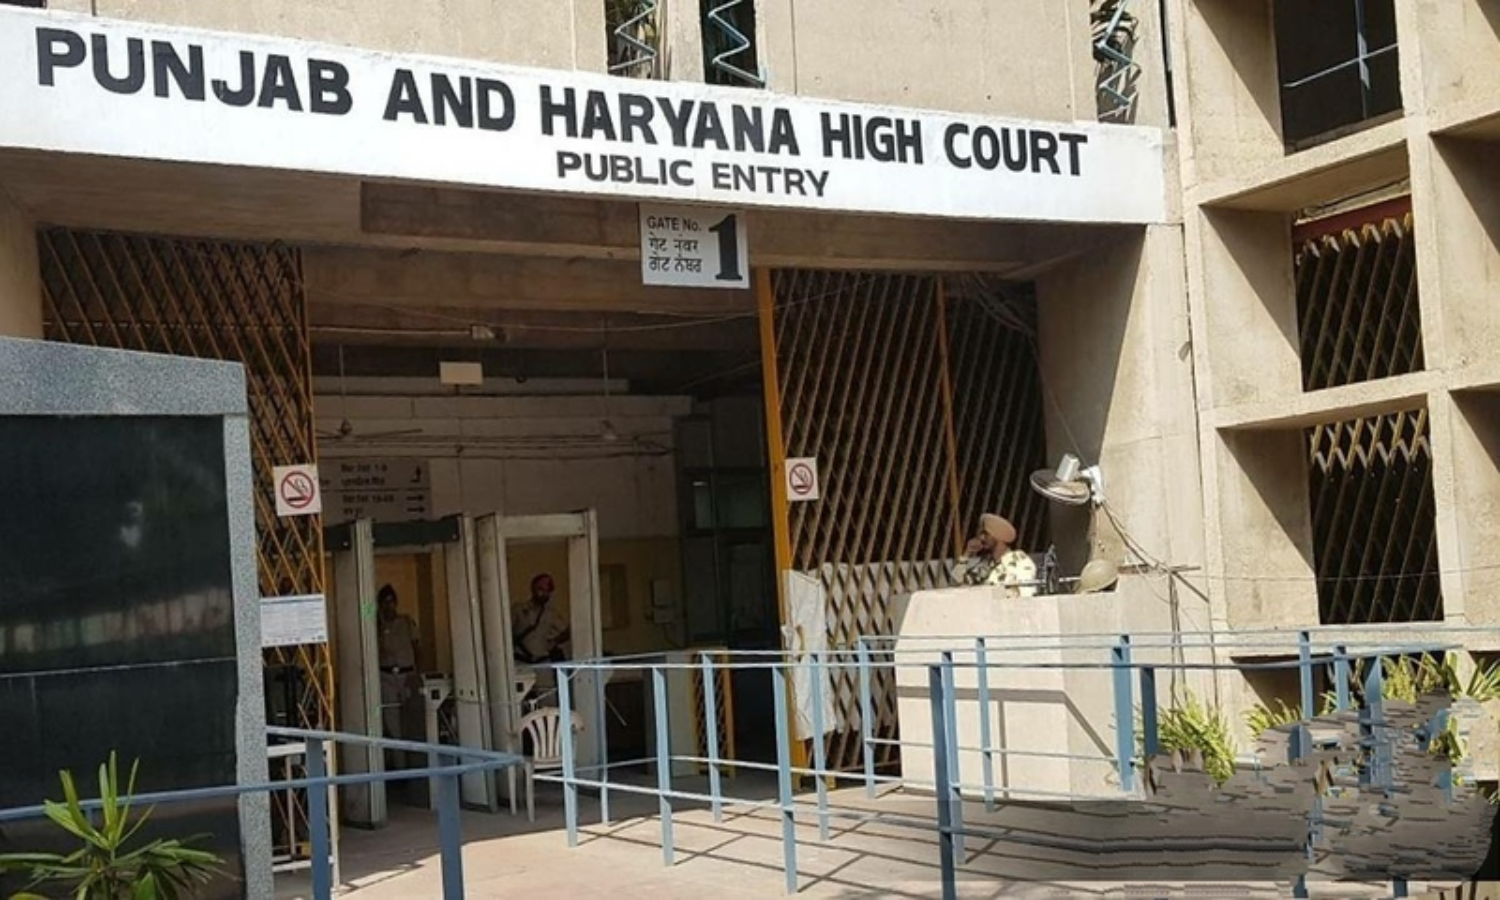 Surge In COVID Cases: Punjab & Haryana High Court To Function Through  Virtual Mode Only From January 5